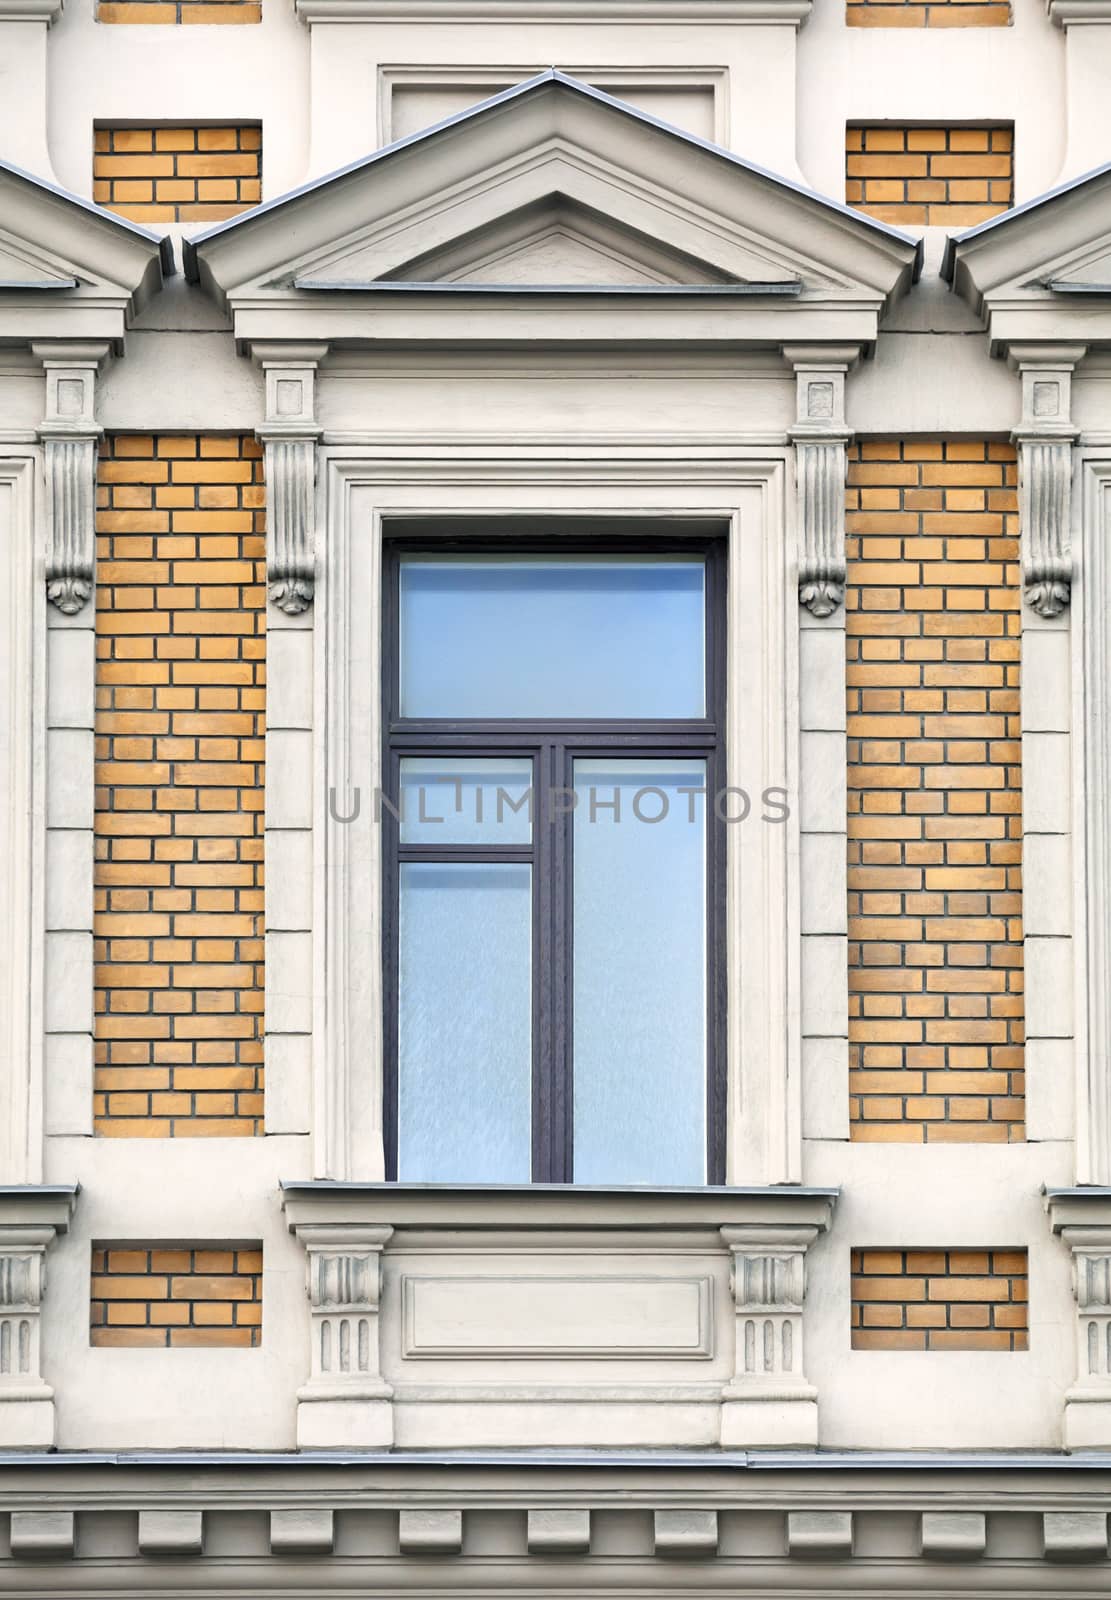 Architecture detail, window of an old building, Saint-Petersburg, Russia